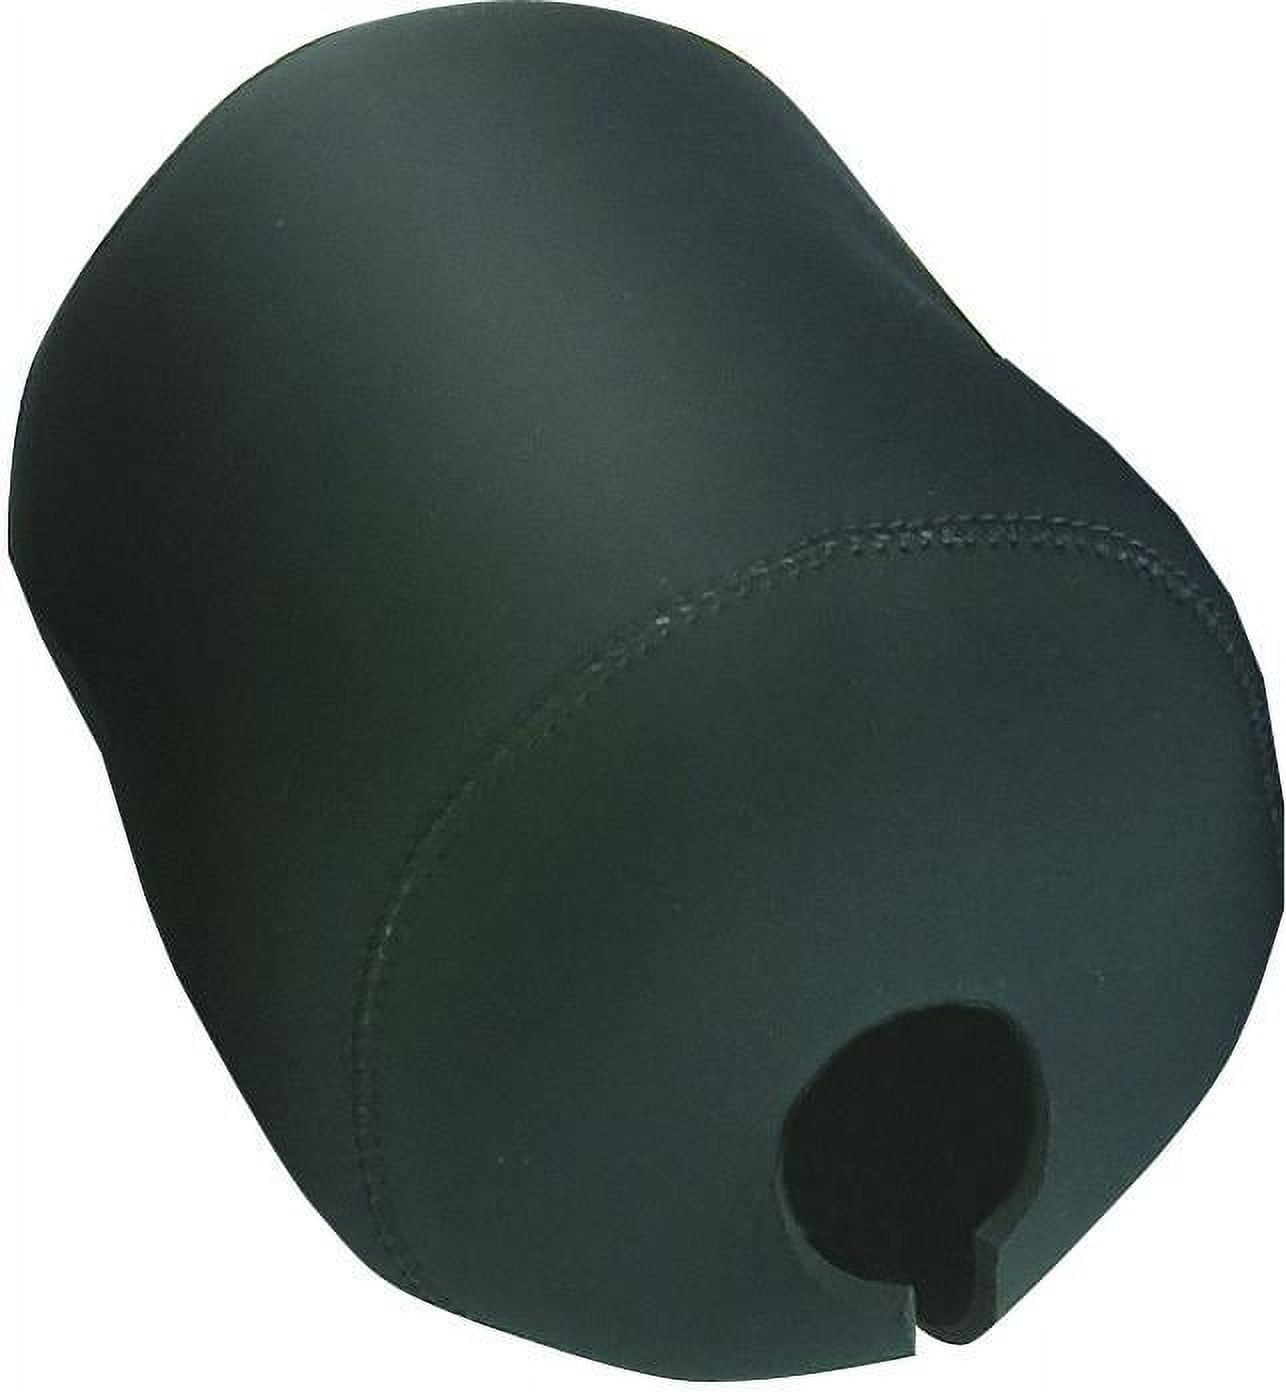 Boone 33331 Small Soft Reel Cover Black fits Round-Baitcast Reels 